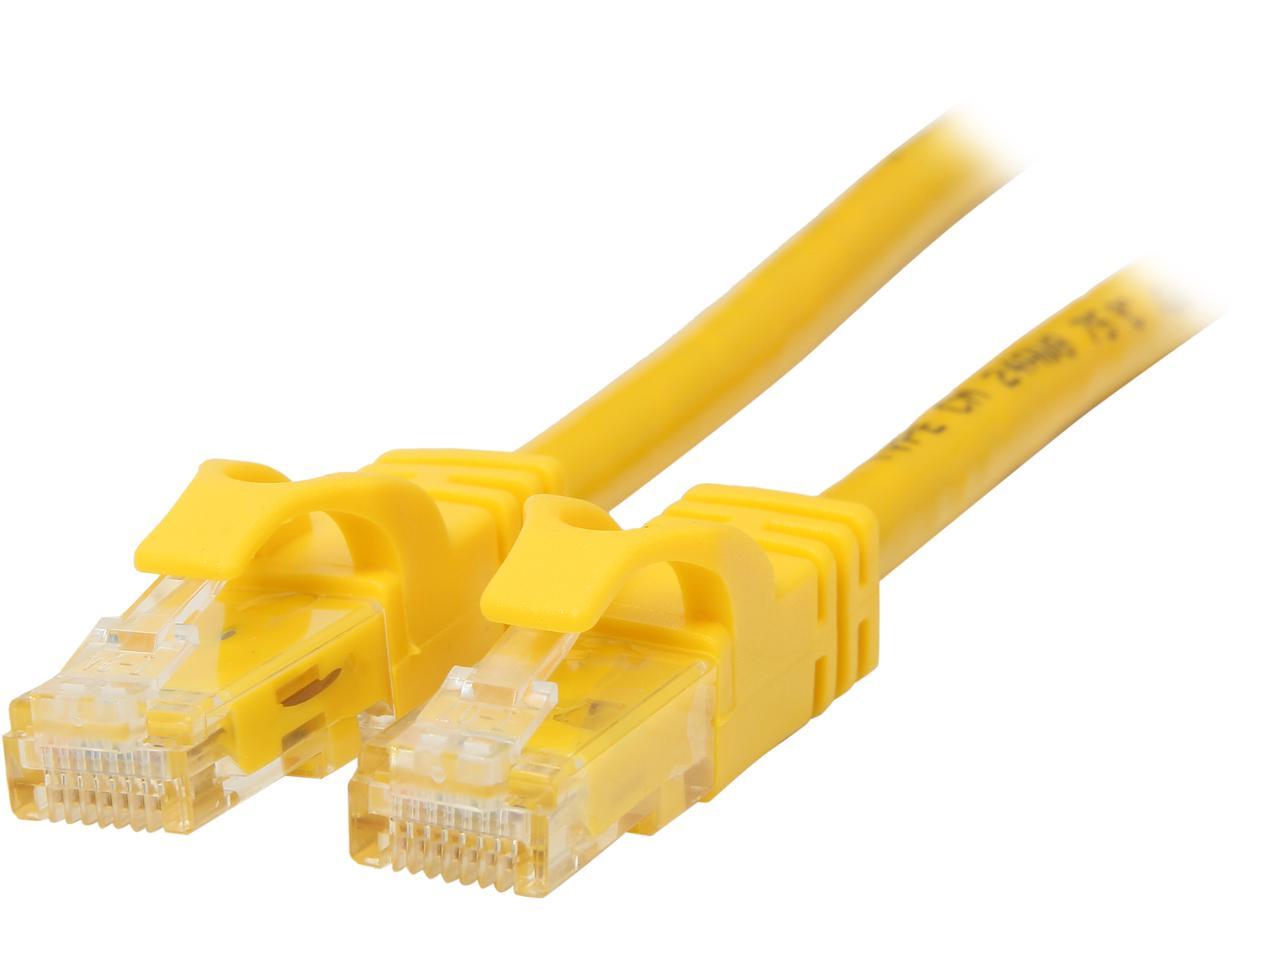 C2G 31346 Cat6 Cable - Snagless Unshielded Ethernet Network Patch Cable, Yellow (5 Feet, 1.52 Meters)